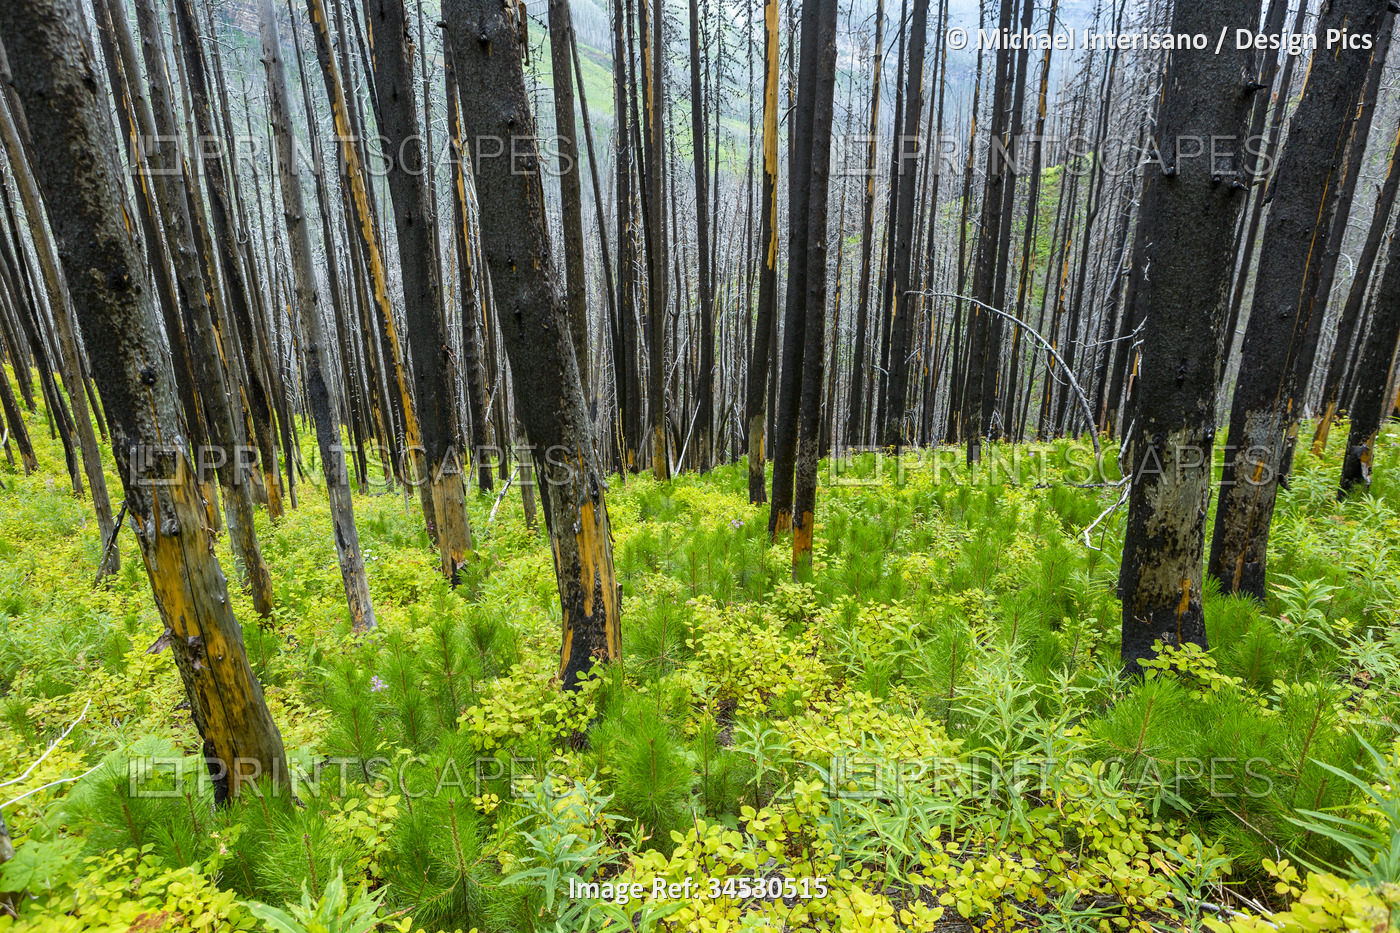 Burned trees with with a lush green undergrowth, Waterton Lakes National Park; ...